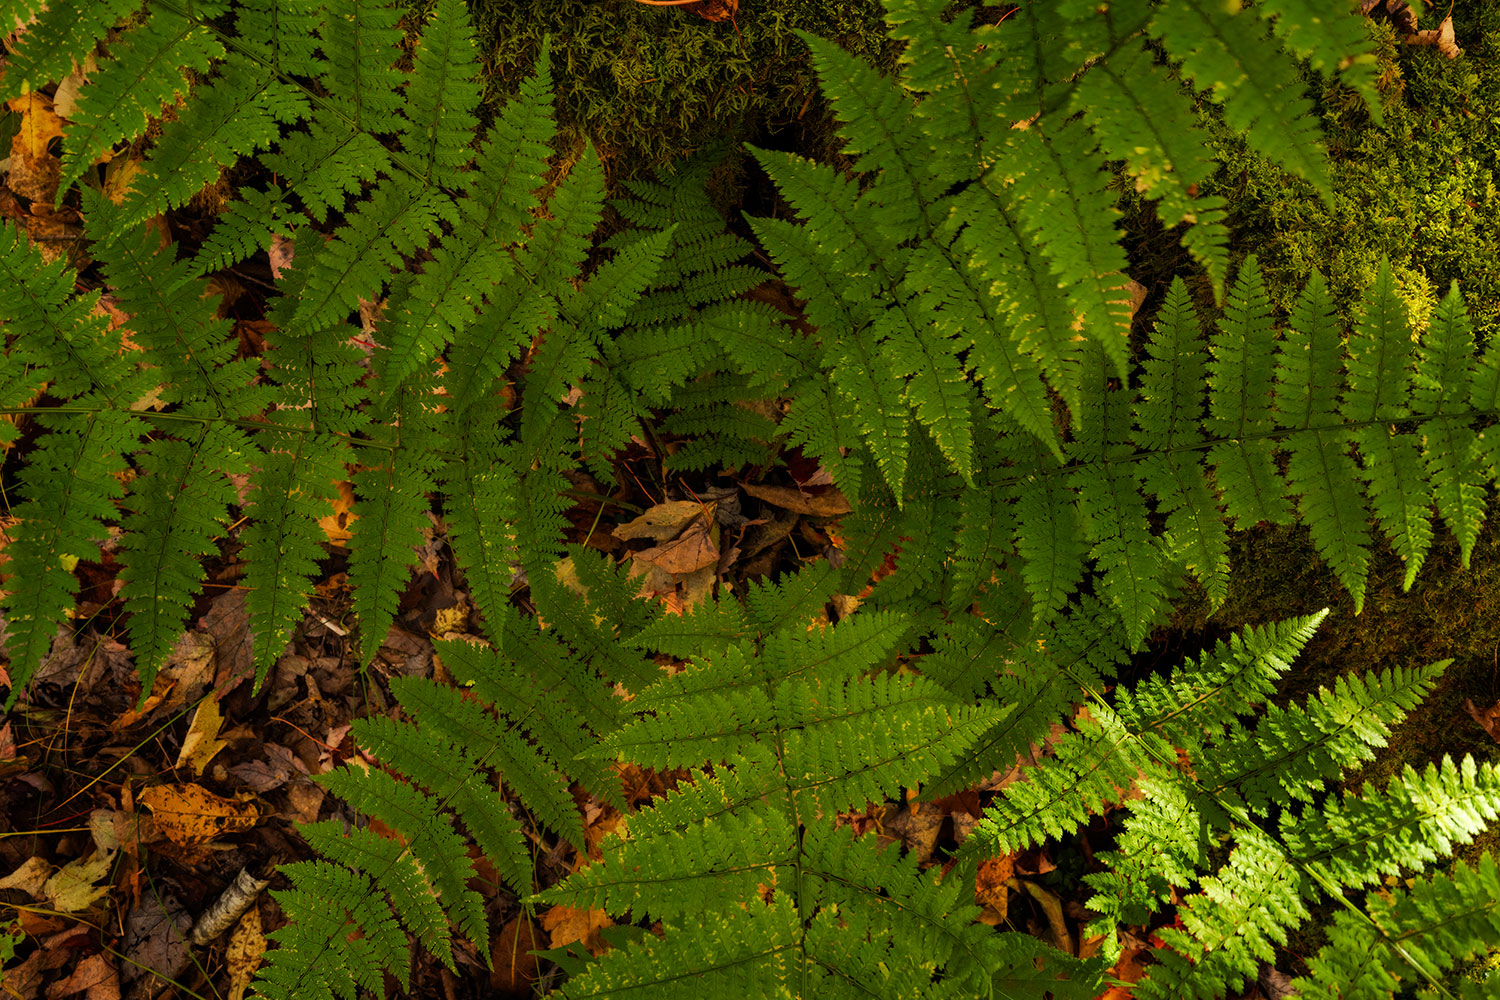 Looking down onto the center of a fern on the forest floor.